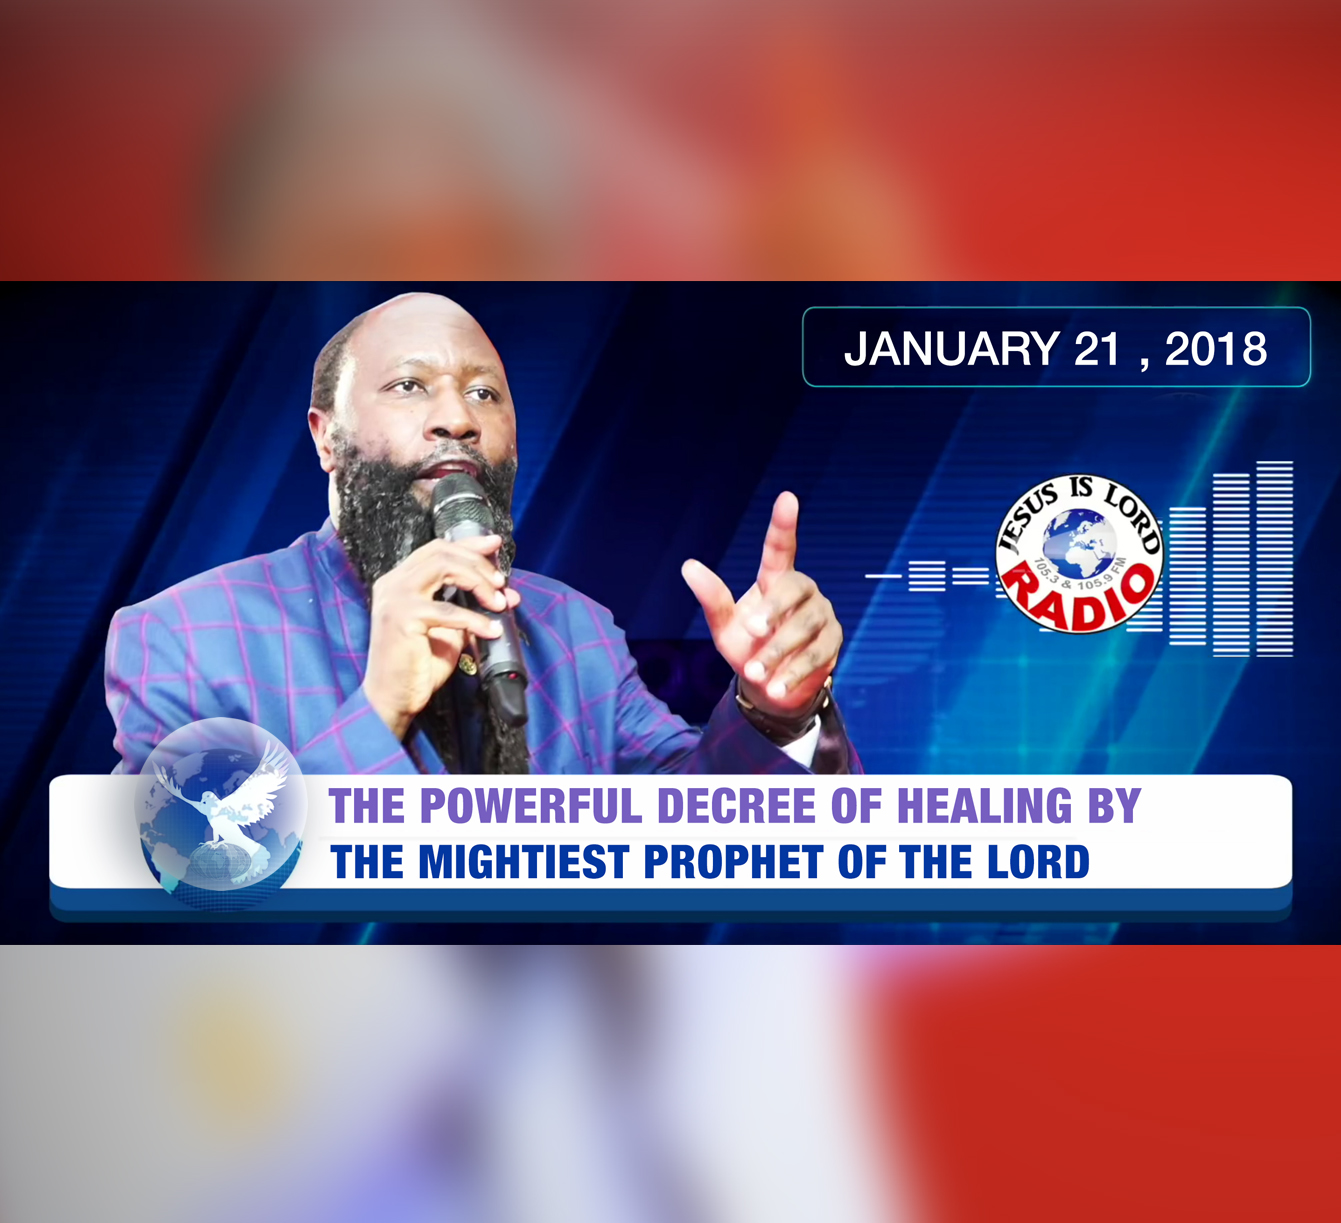 EPISODE 107 - THE POWERFUL DECREE OF HEALING BY THE MIGHTIEST PROPHET OF THE LORD (21JAN2018) - PROPHET DR. OWUOR